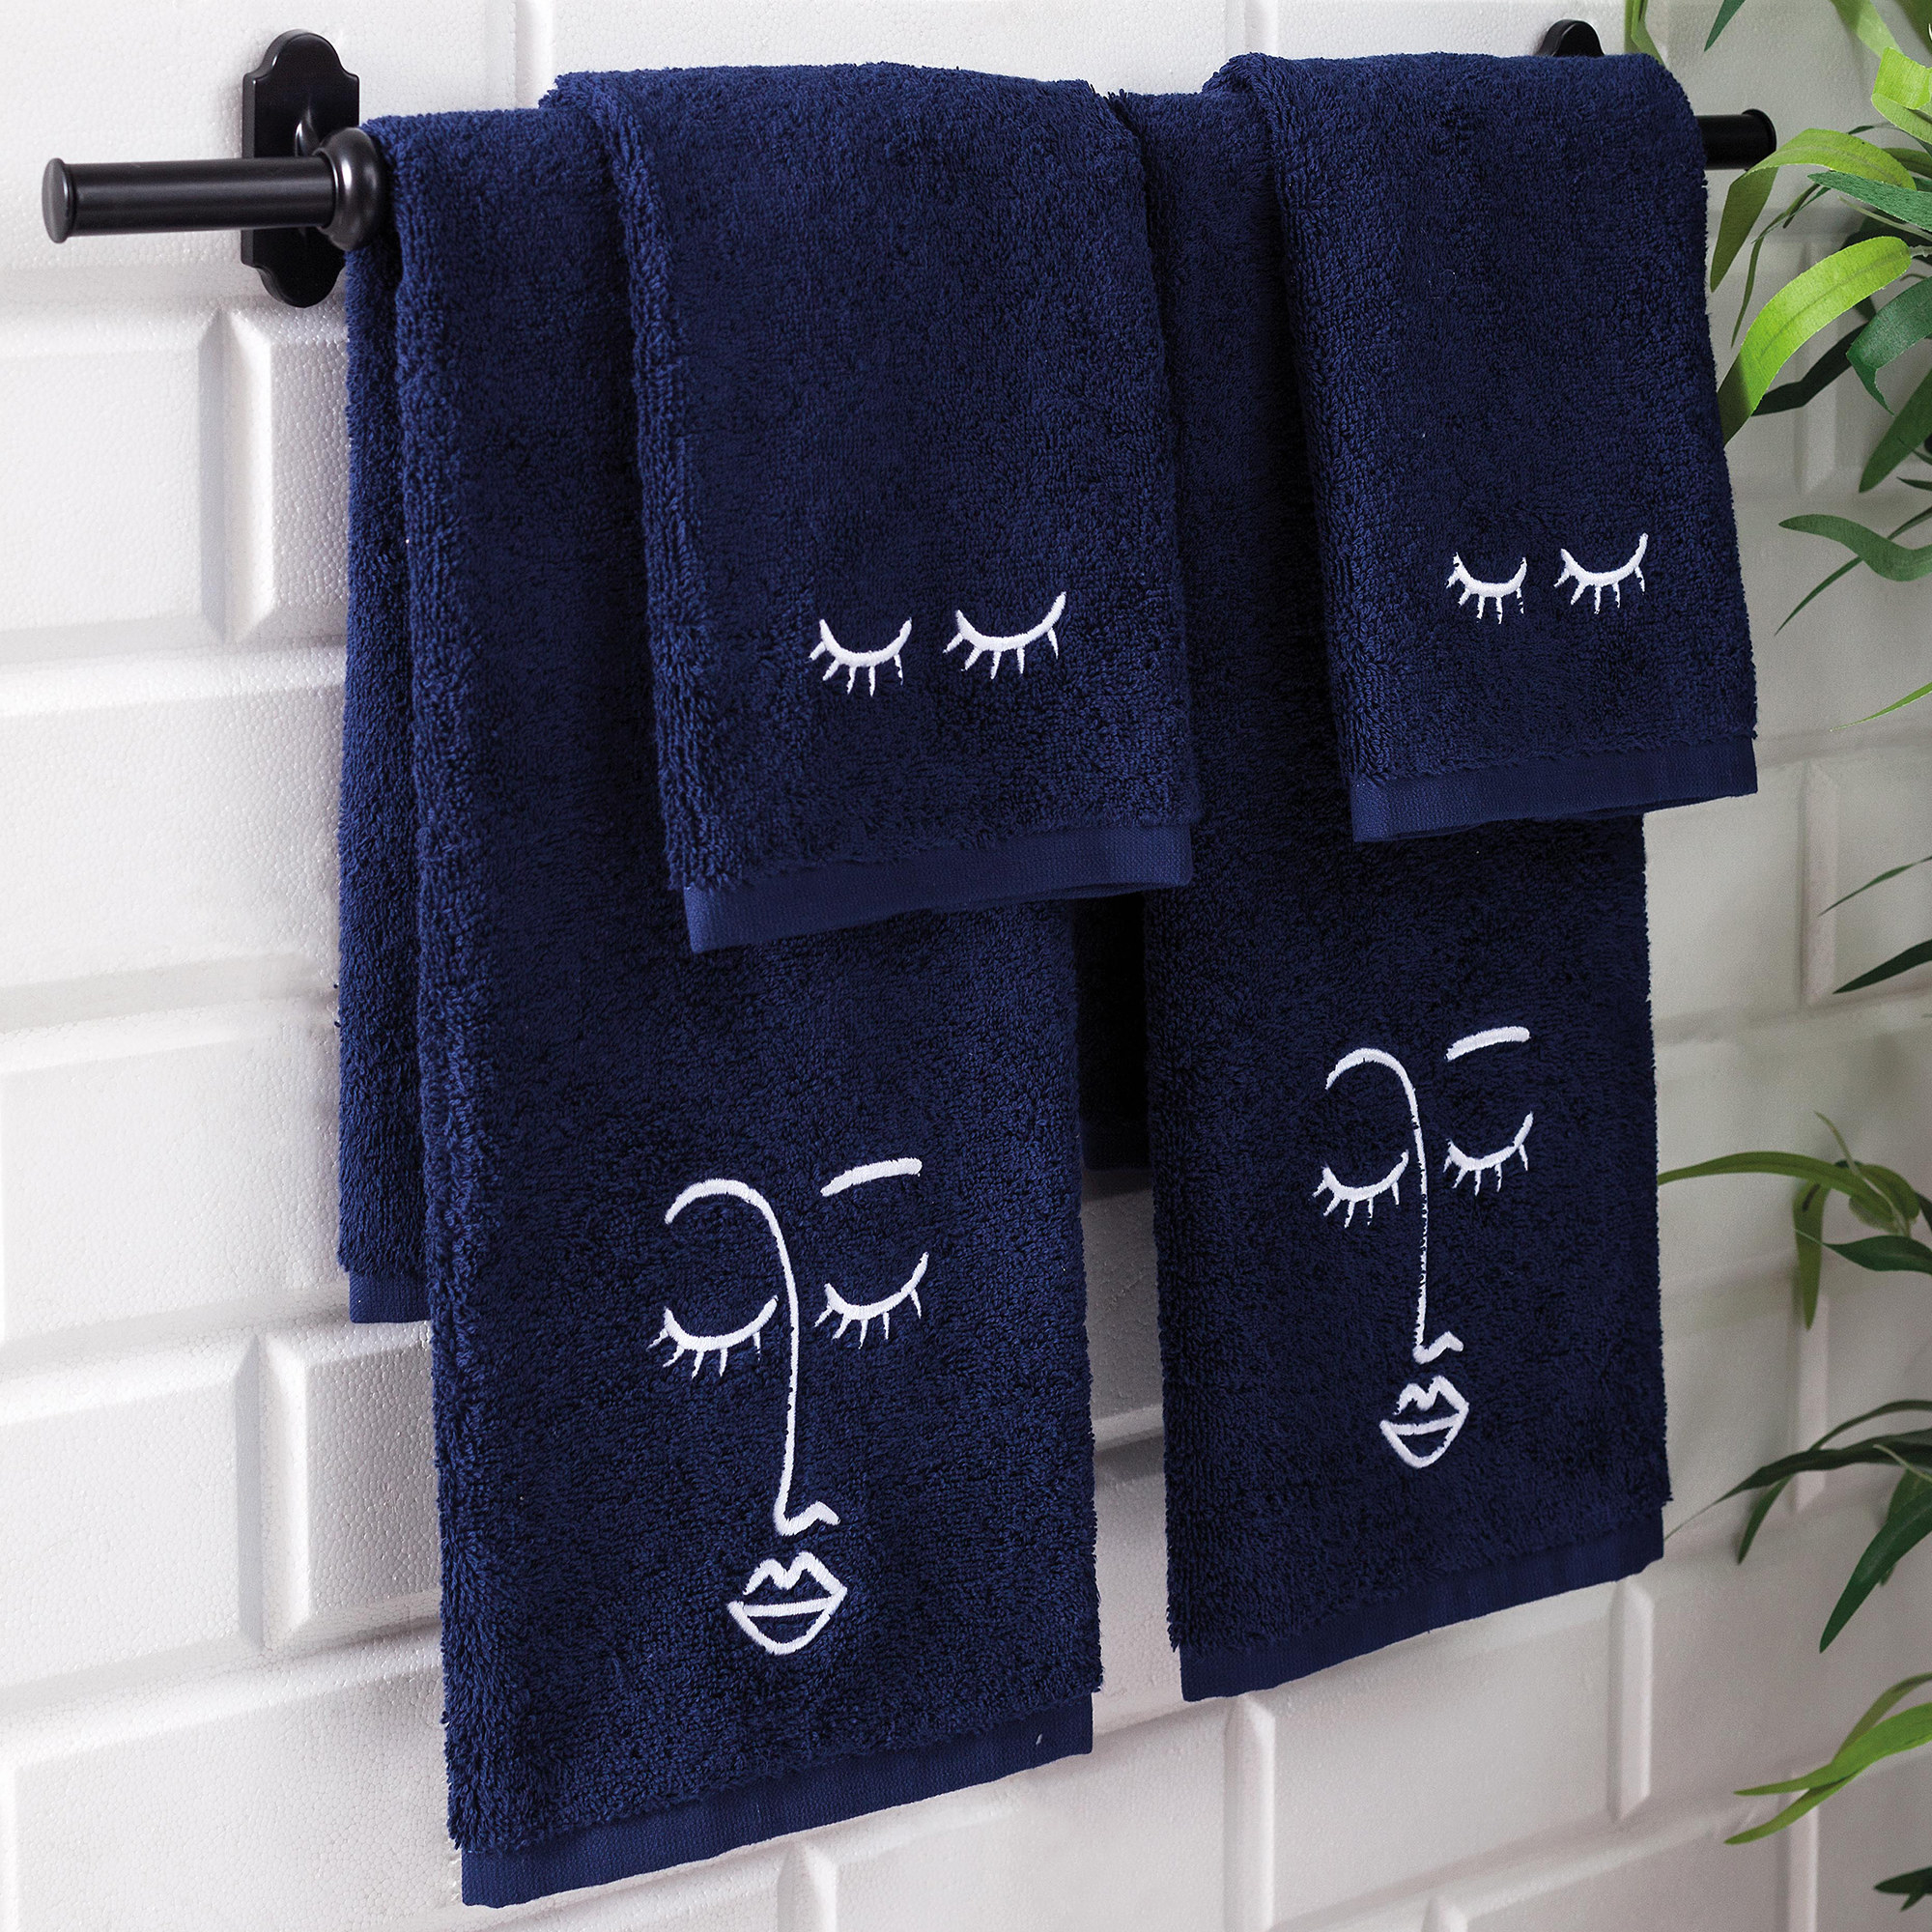 navy blue makeup and face towels with white eyelash and face outline design